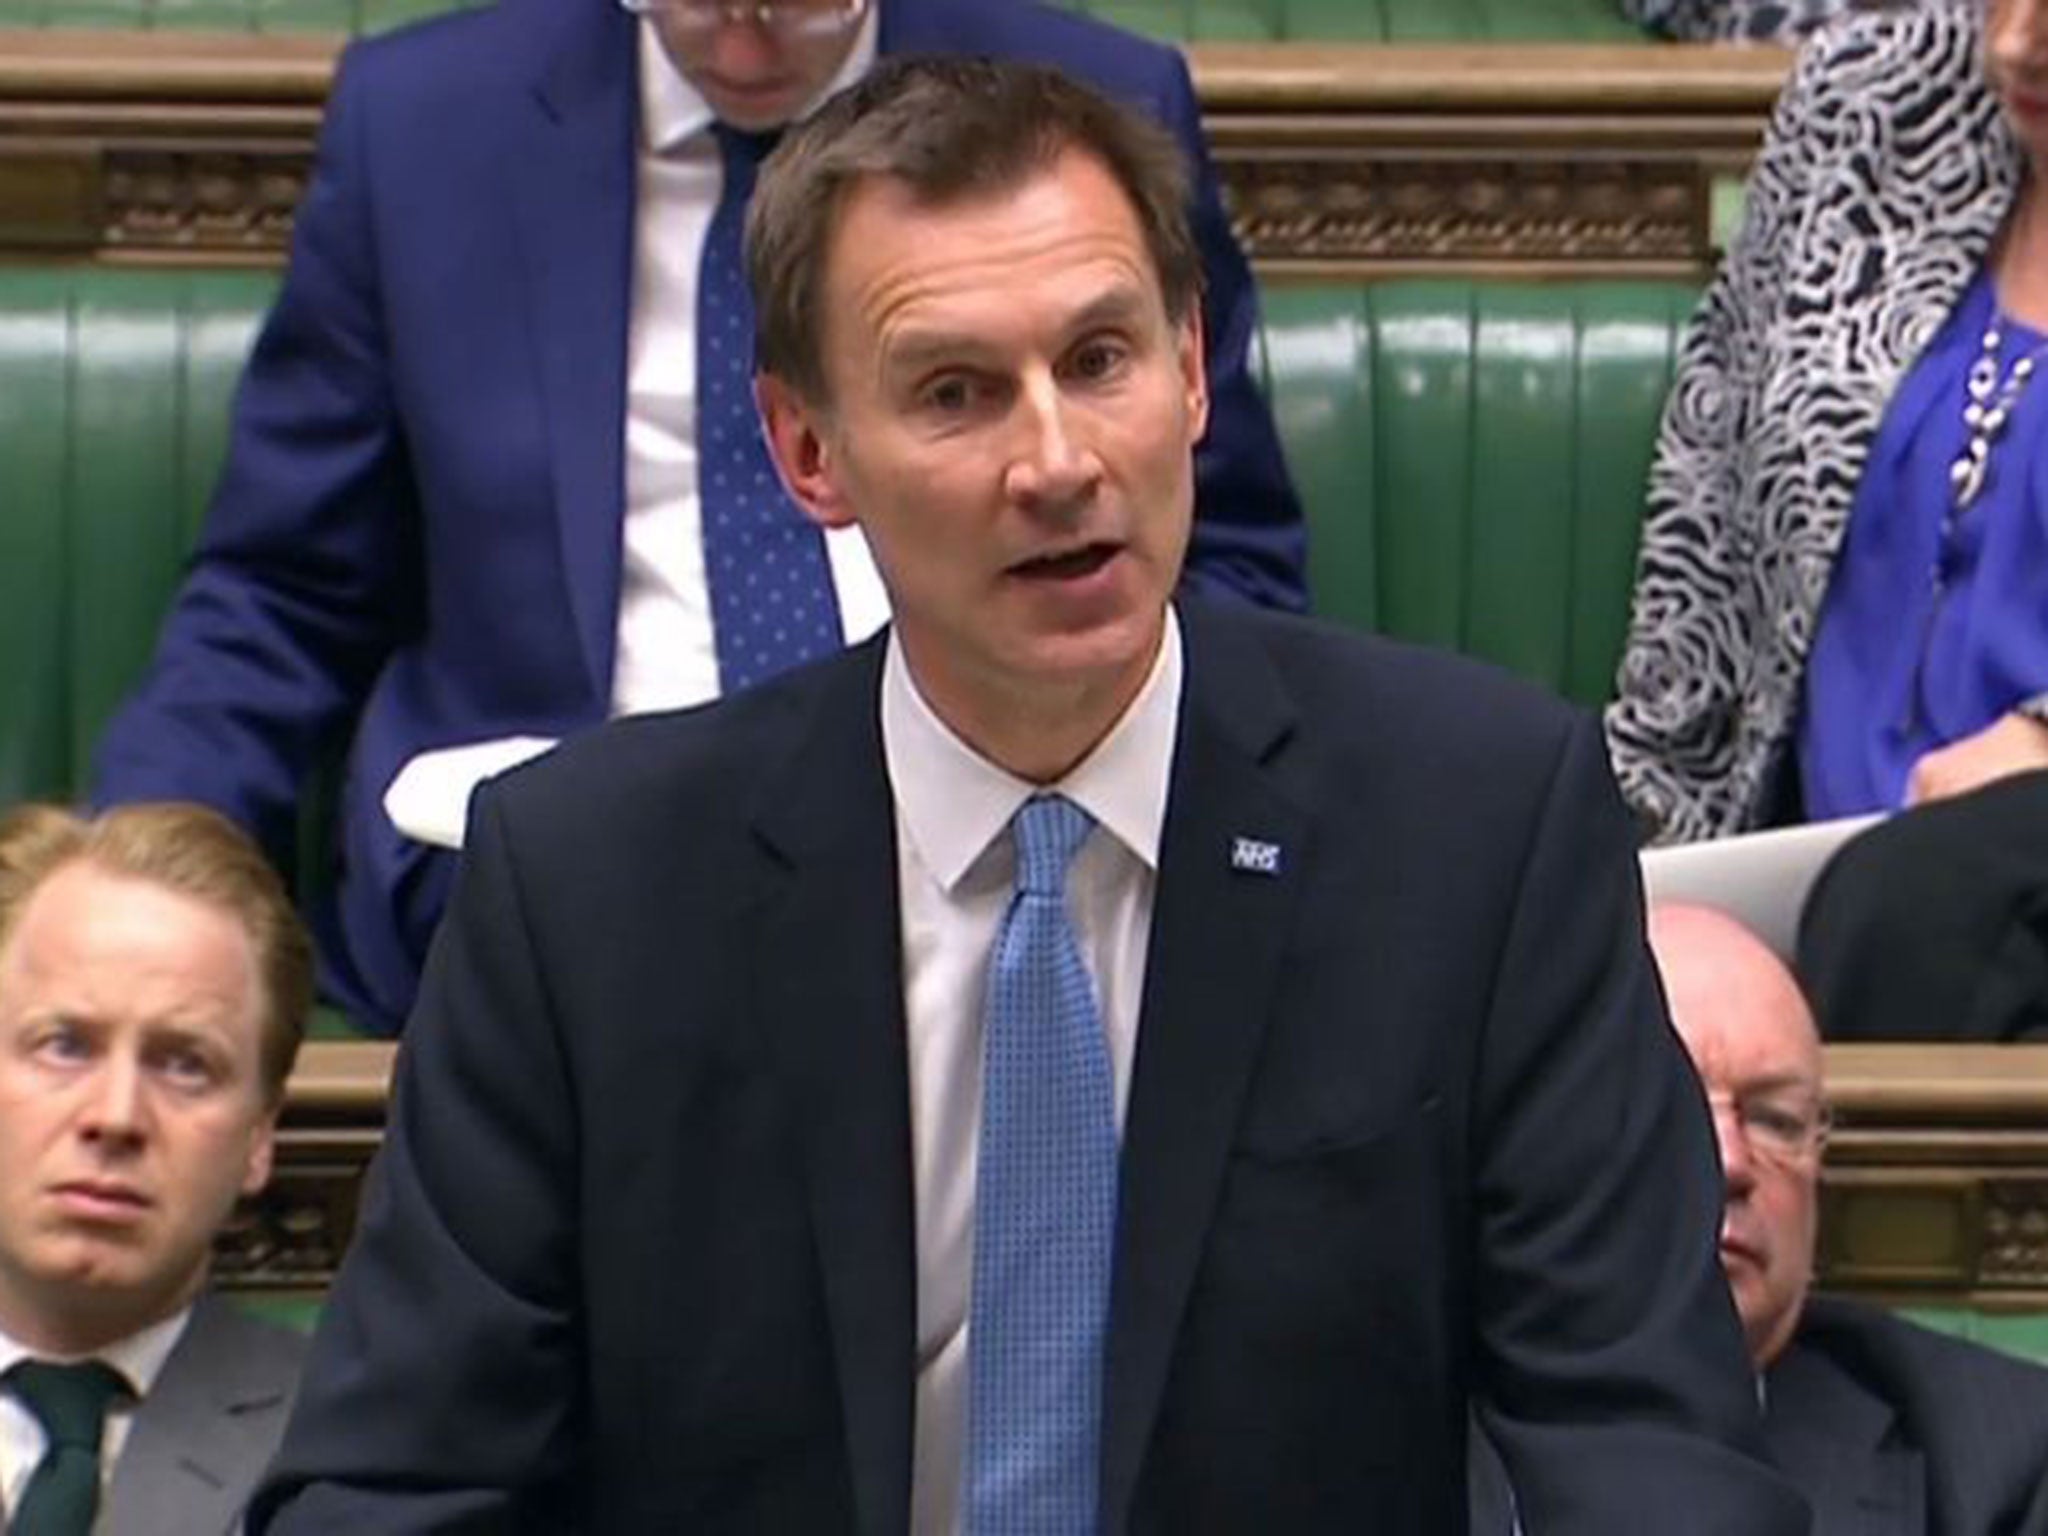 In a statement made in the Commons, Health Secretary Jeremy Hunt refused any compromise on a possible deal